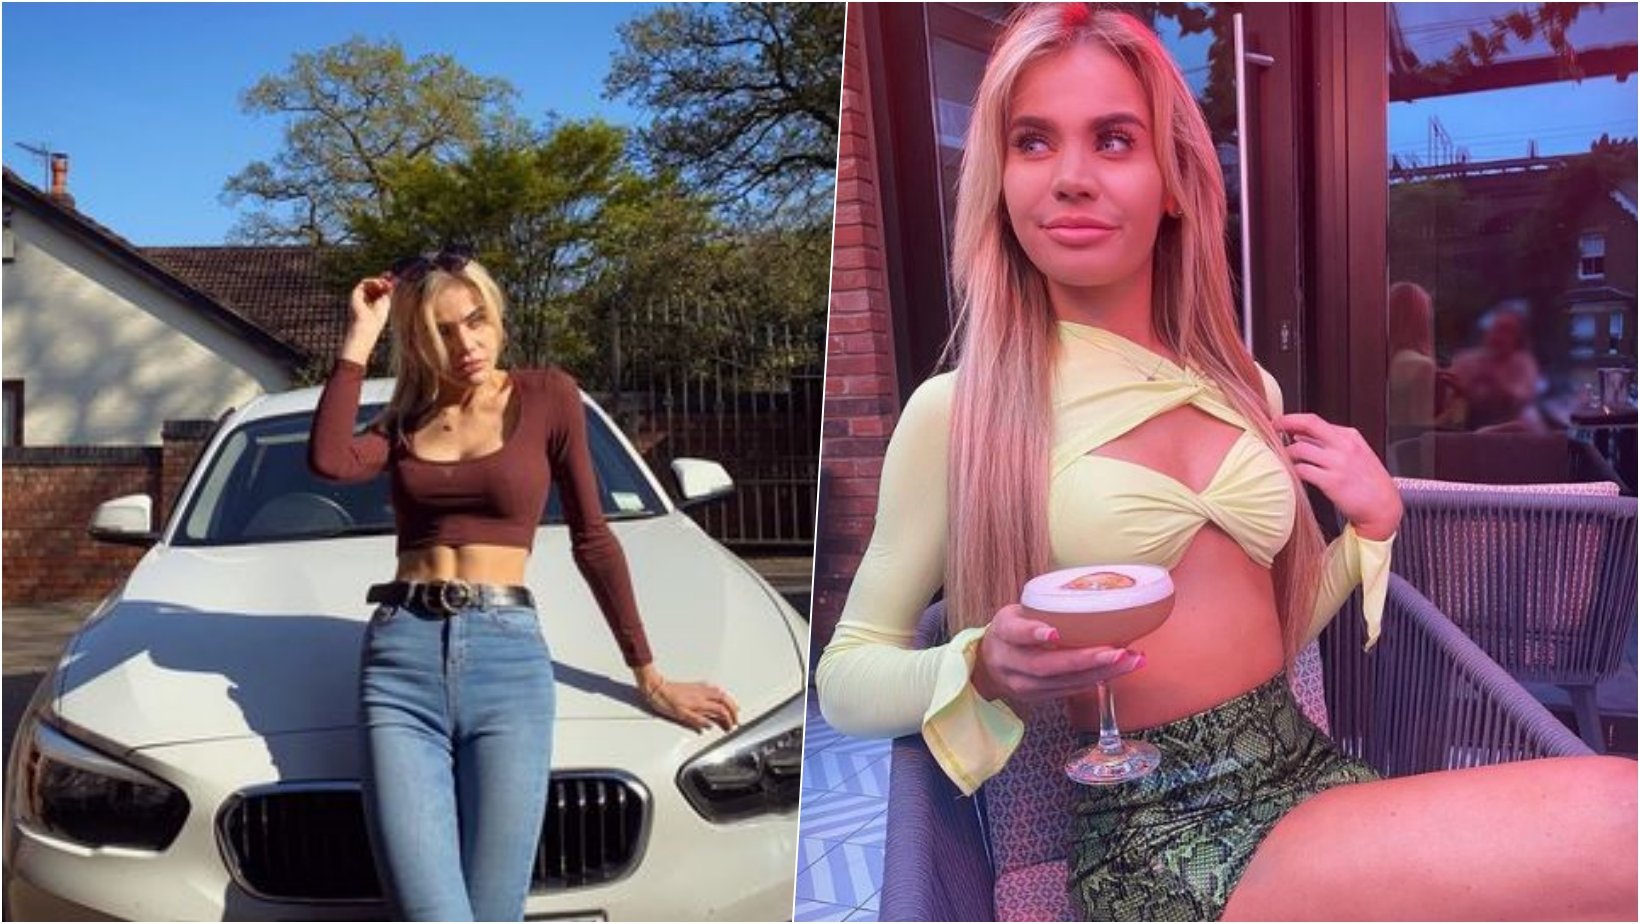 6 facebook cover 10.jpg?resize=412,232 - Socialite Caught Drunk-Driving Begs Judge Not To Ban Her License, Saying She Doesn’t Want To Use Public Transport